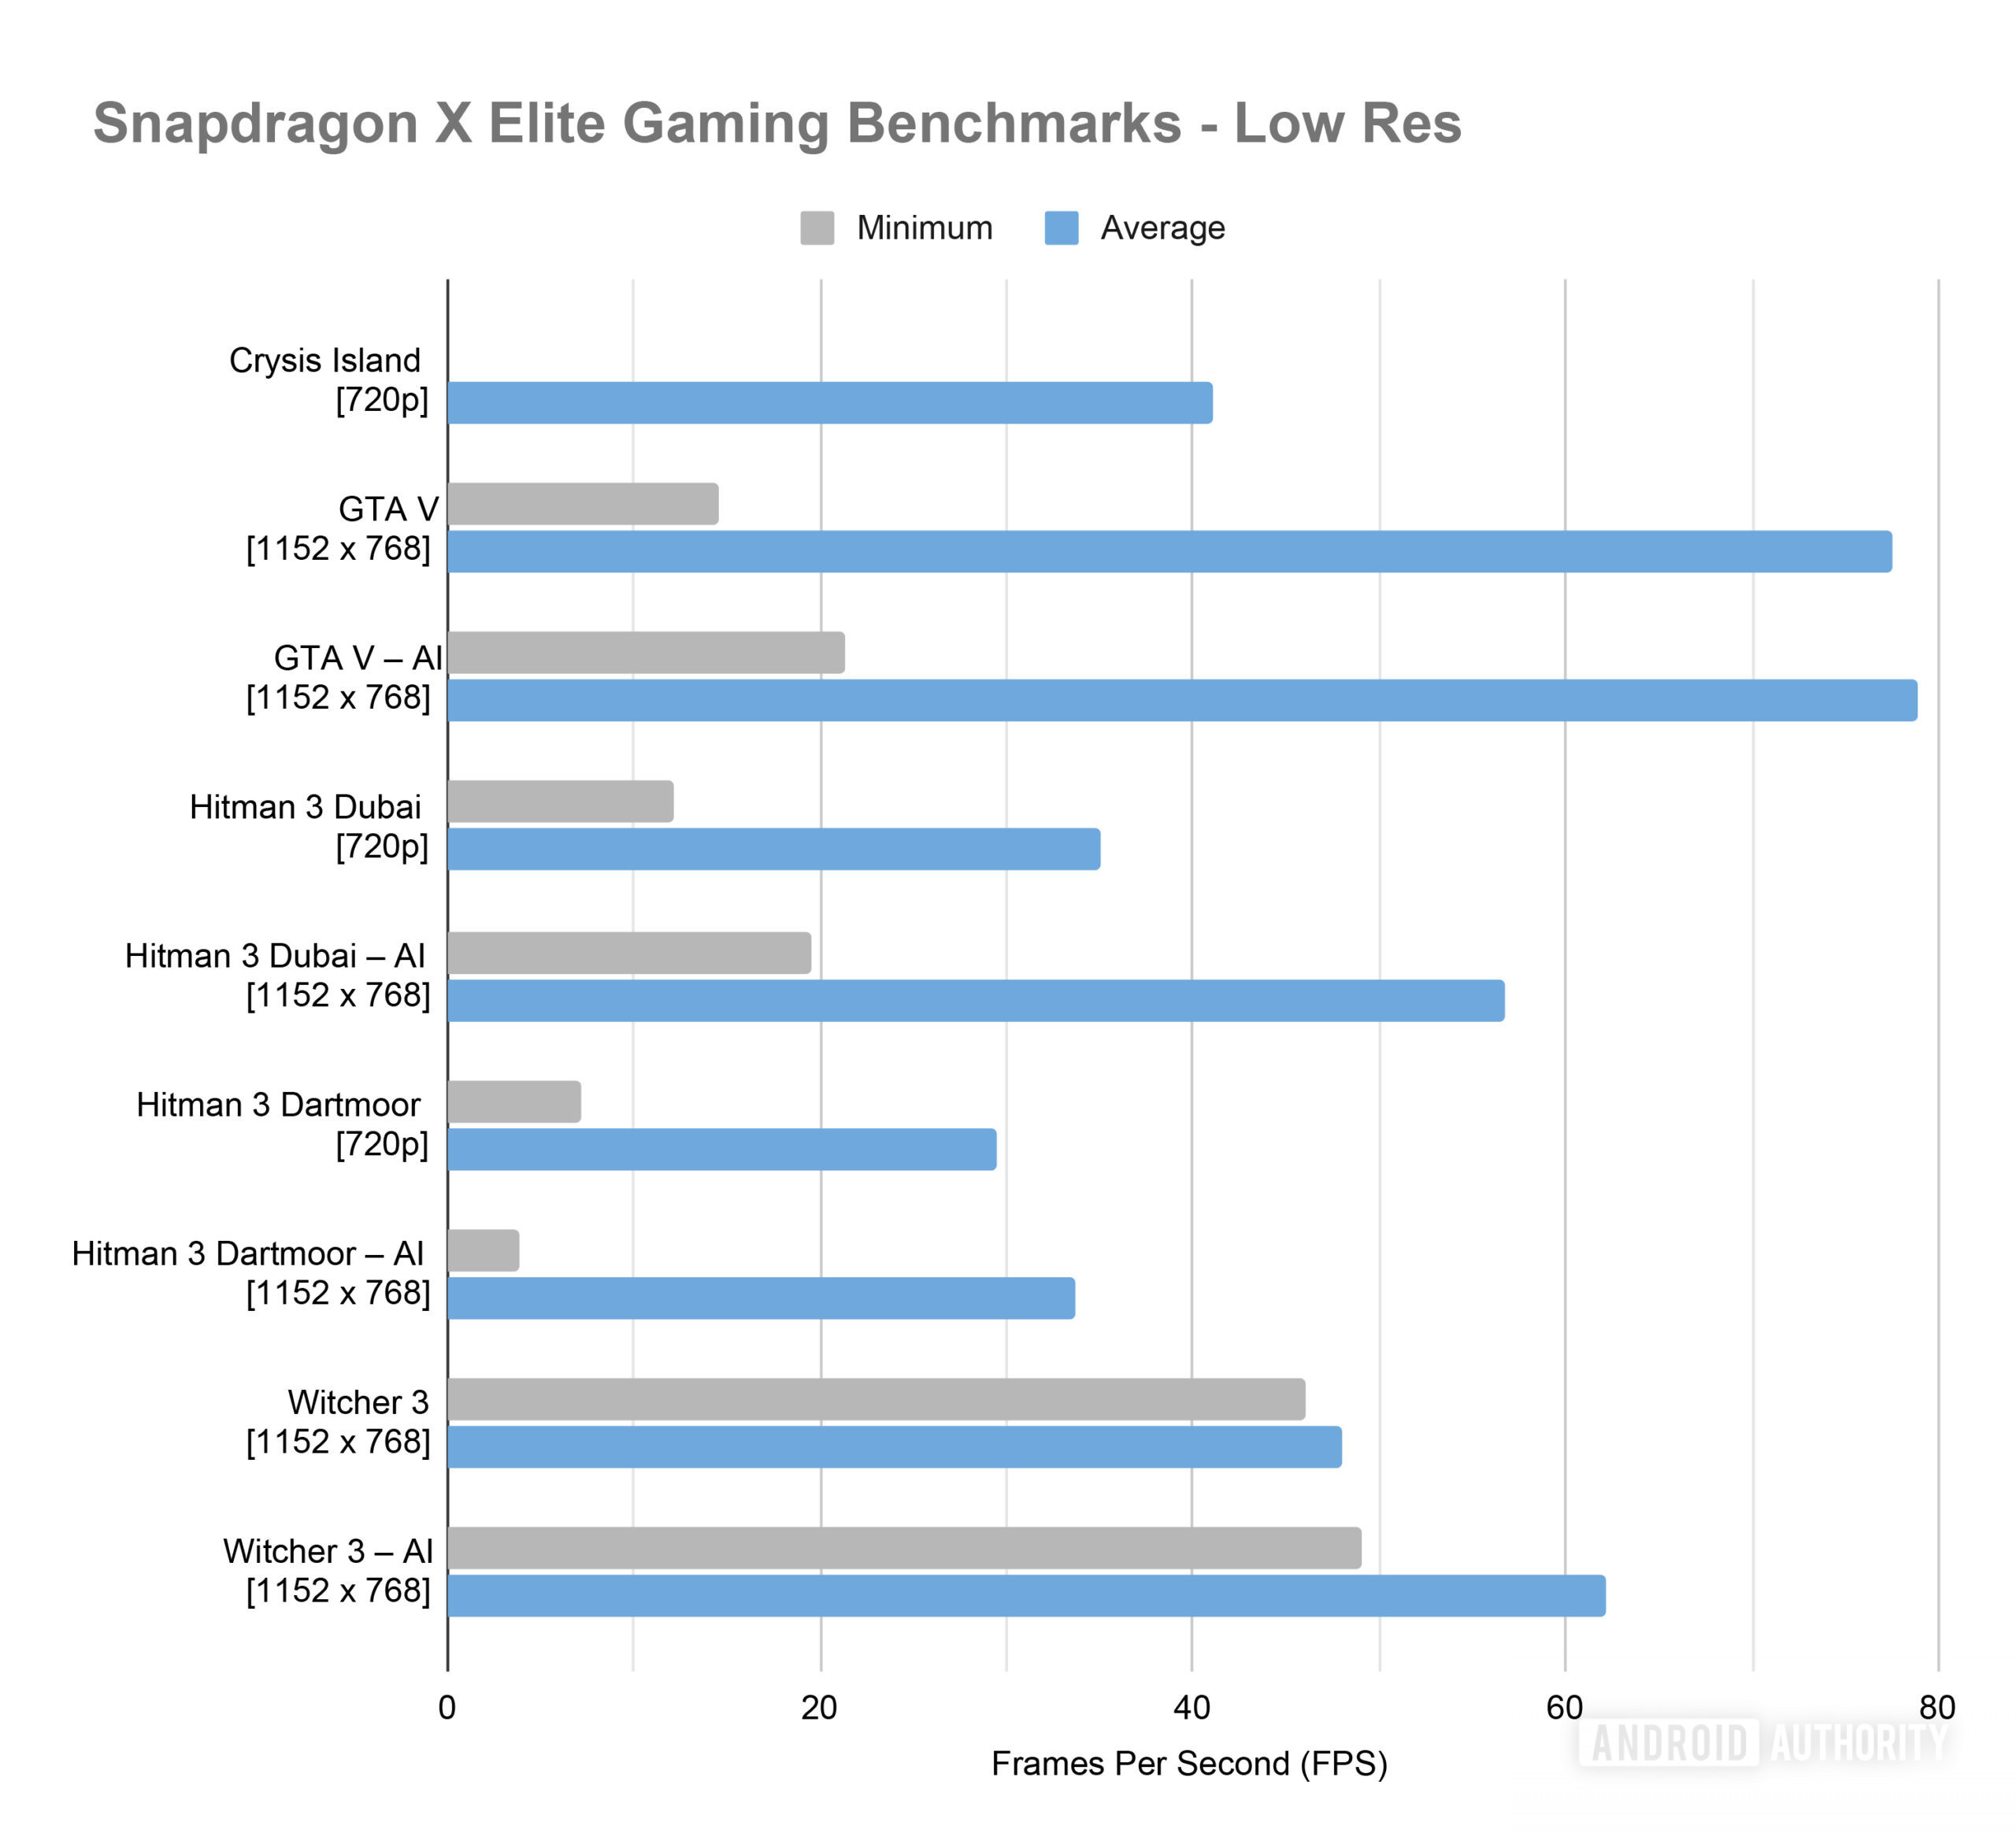 Snapdragon X Elite Gaming Benchmarks Low Res